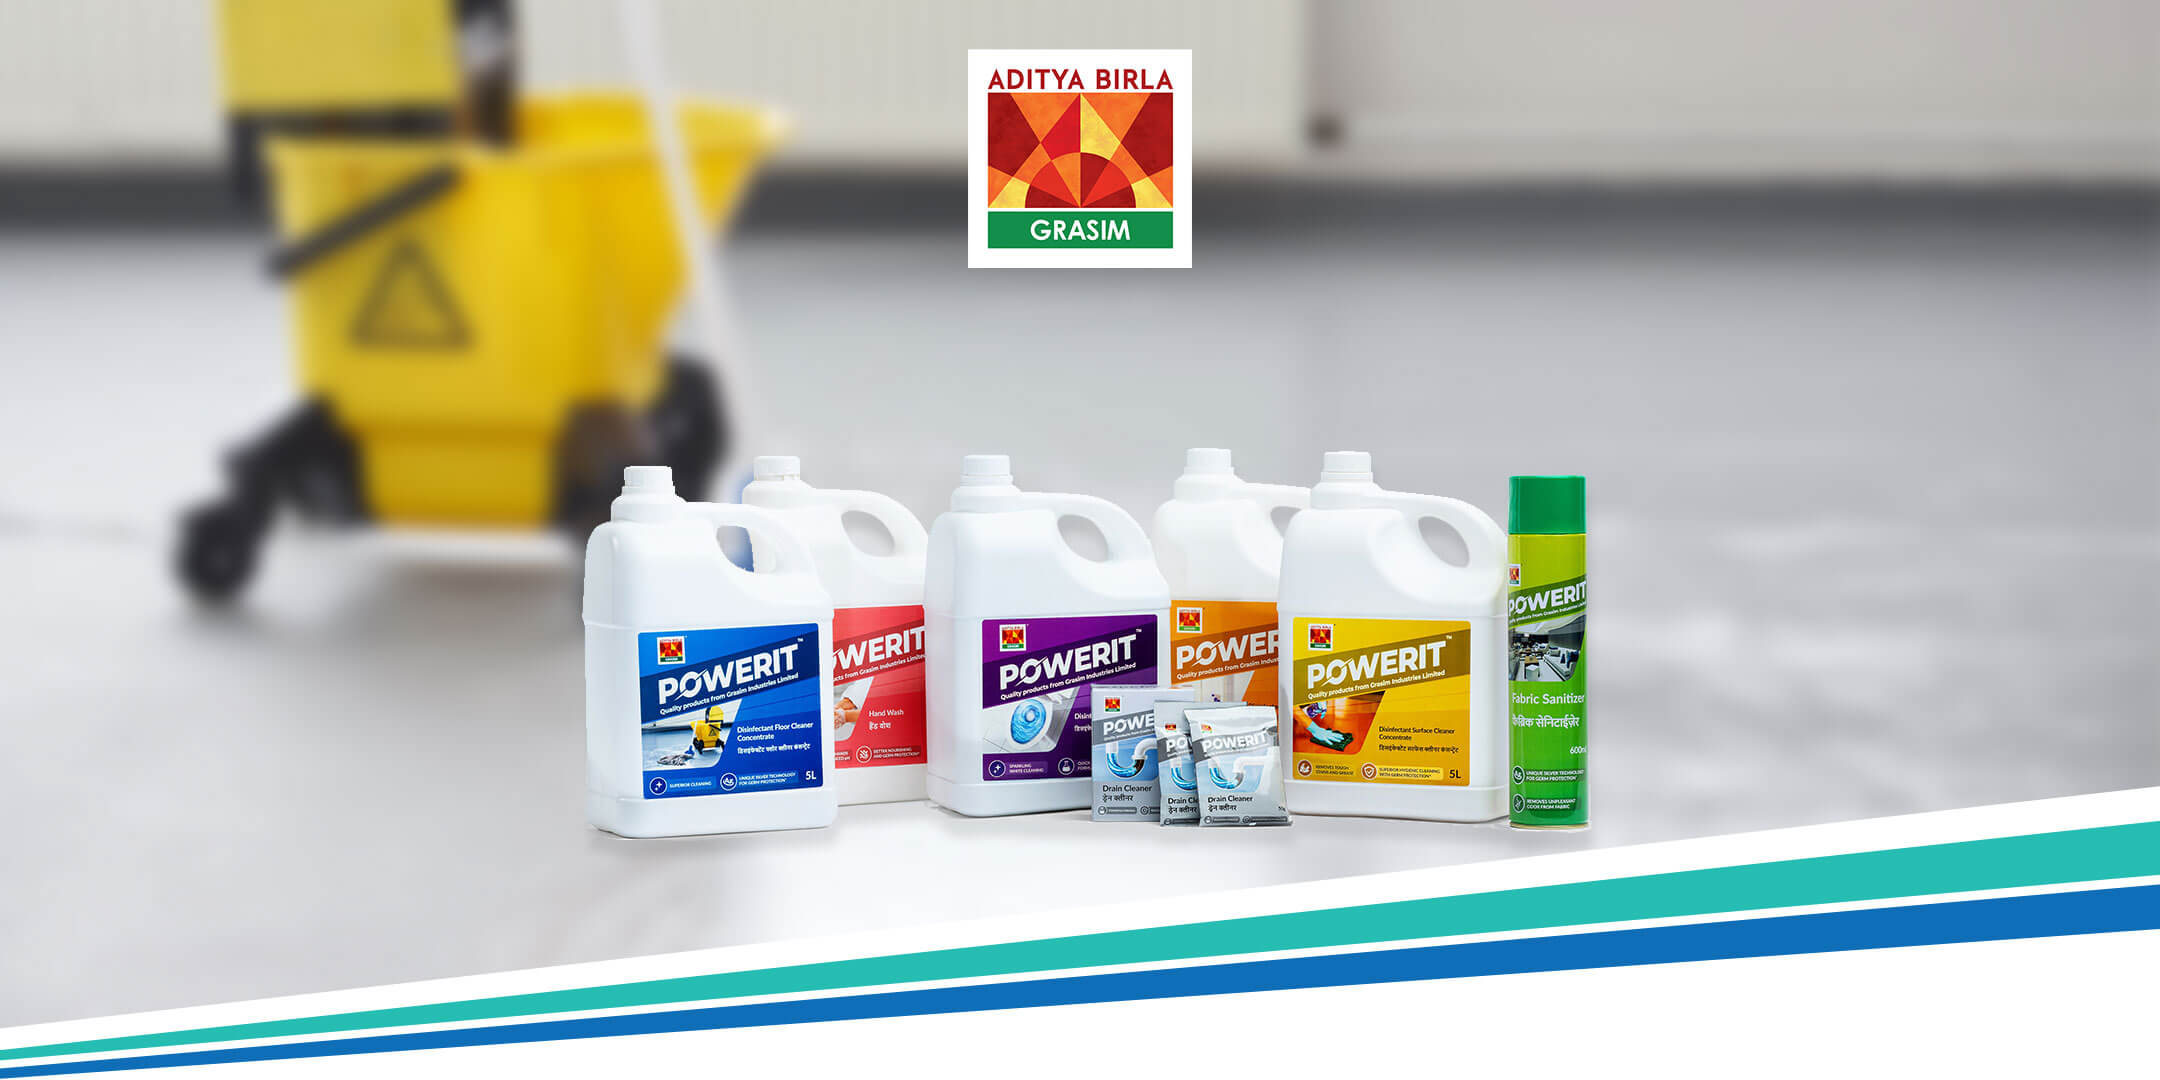 POWERIT range by Grasim Industries Limited leading in Disinfectants & Cleaning Chemicals